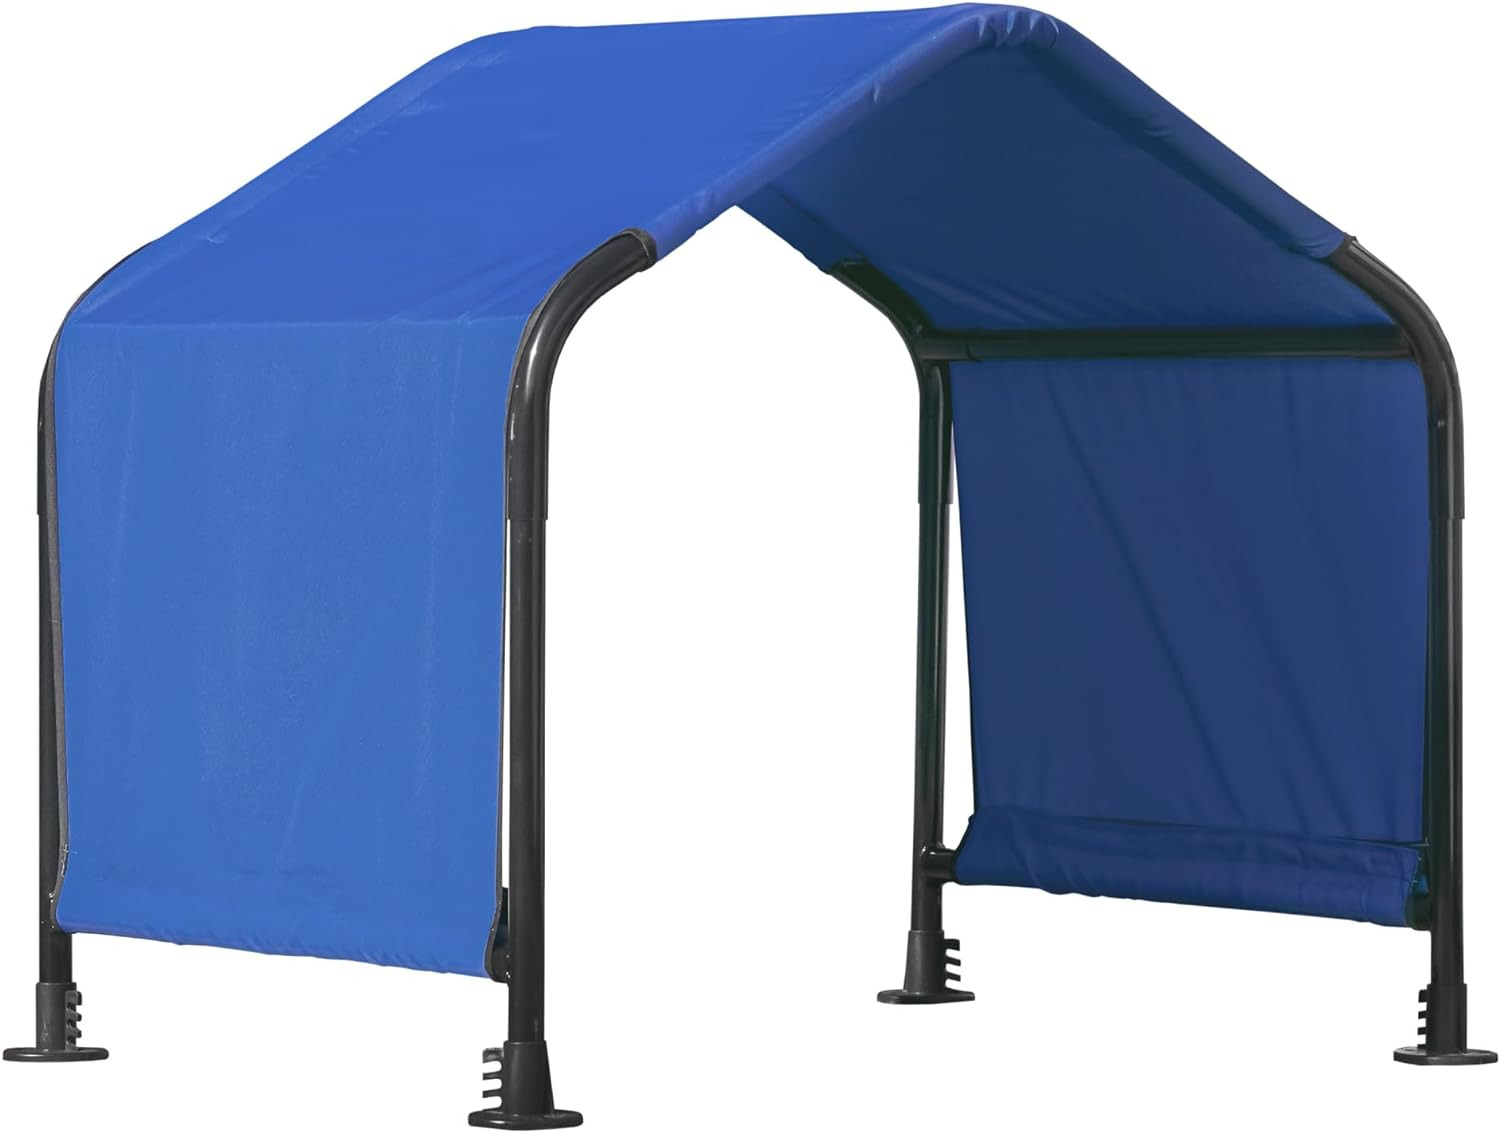 2.5' Outdoor Pet Shade, Versatile Pet Canopy Tent for Small-Breed Dogs, Cats, Sm